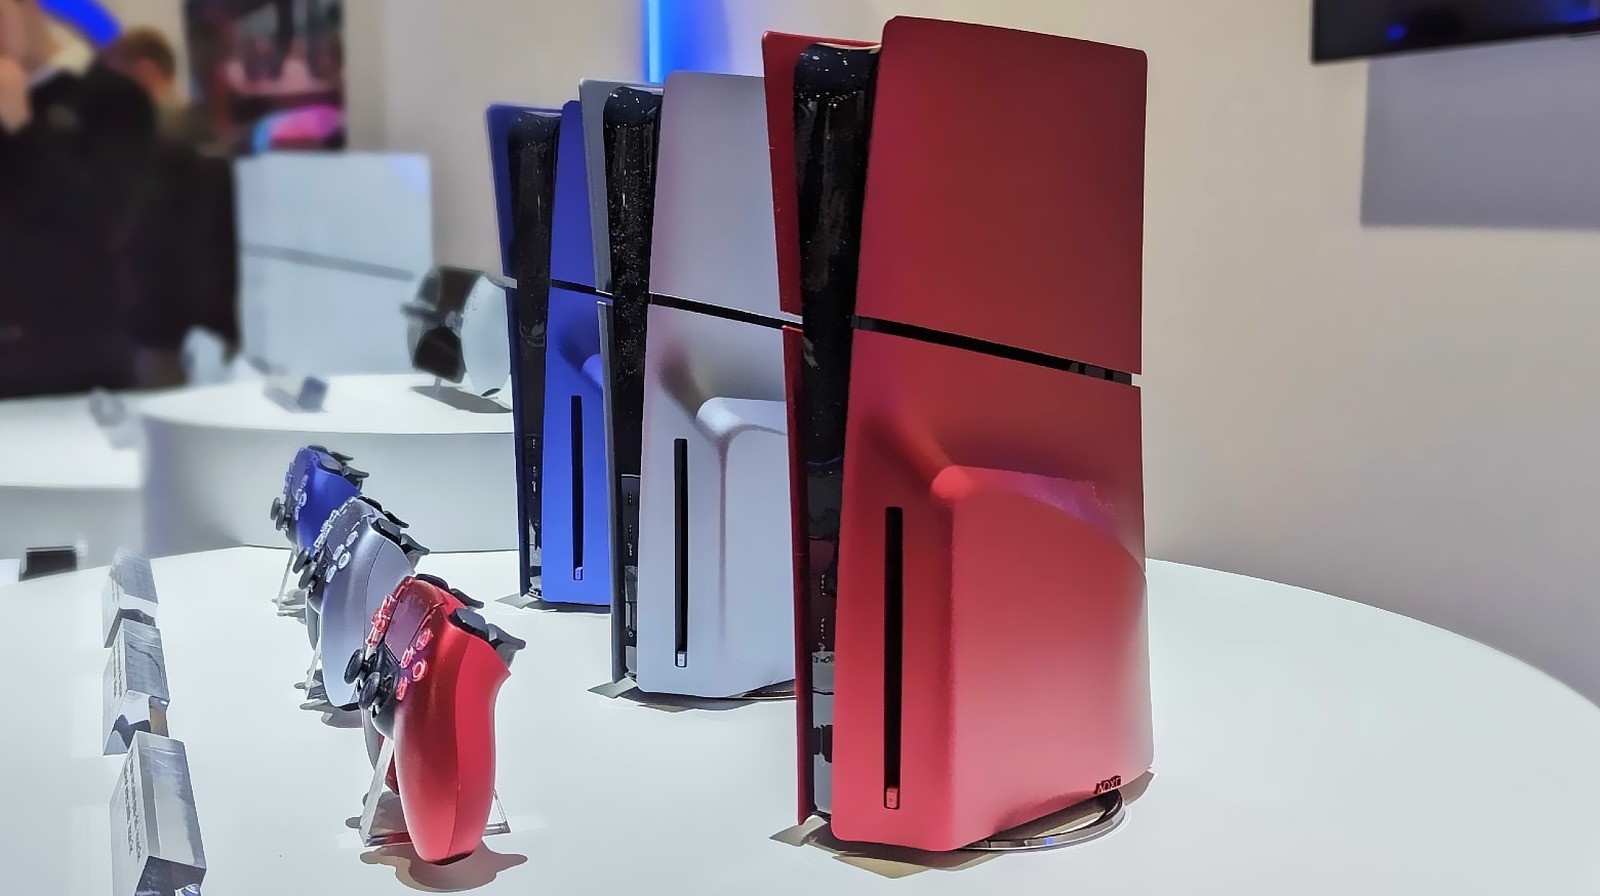 (Sony Shows Off PS5 Slim With Colorful Metallic Console Covers) Melbet